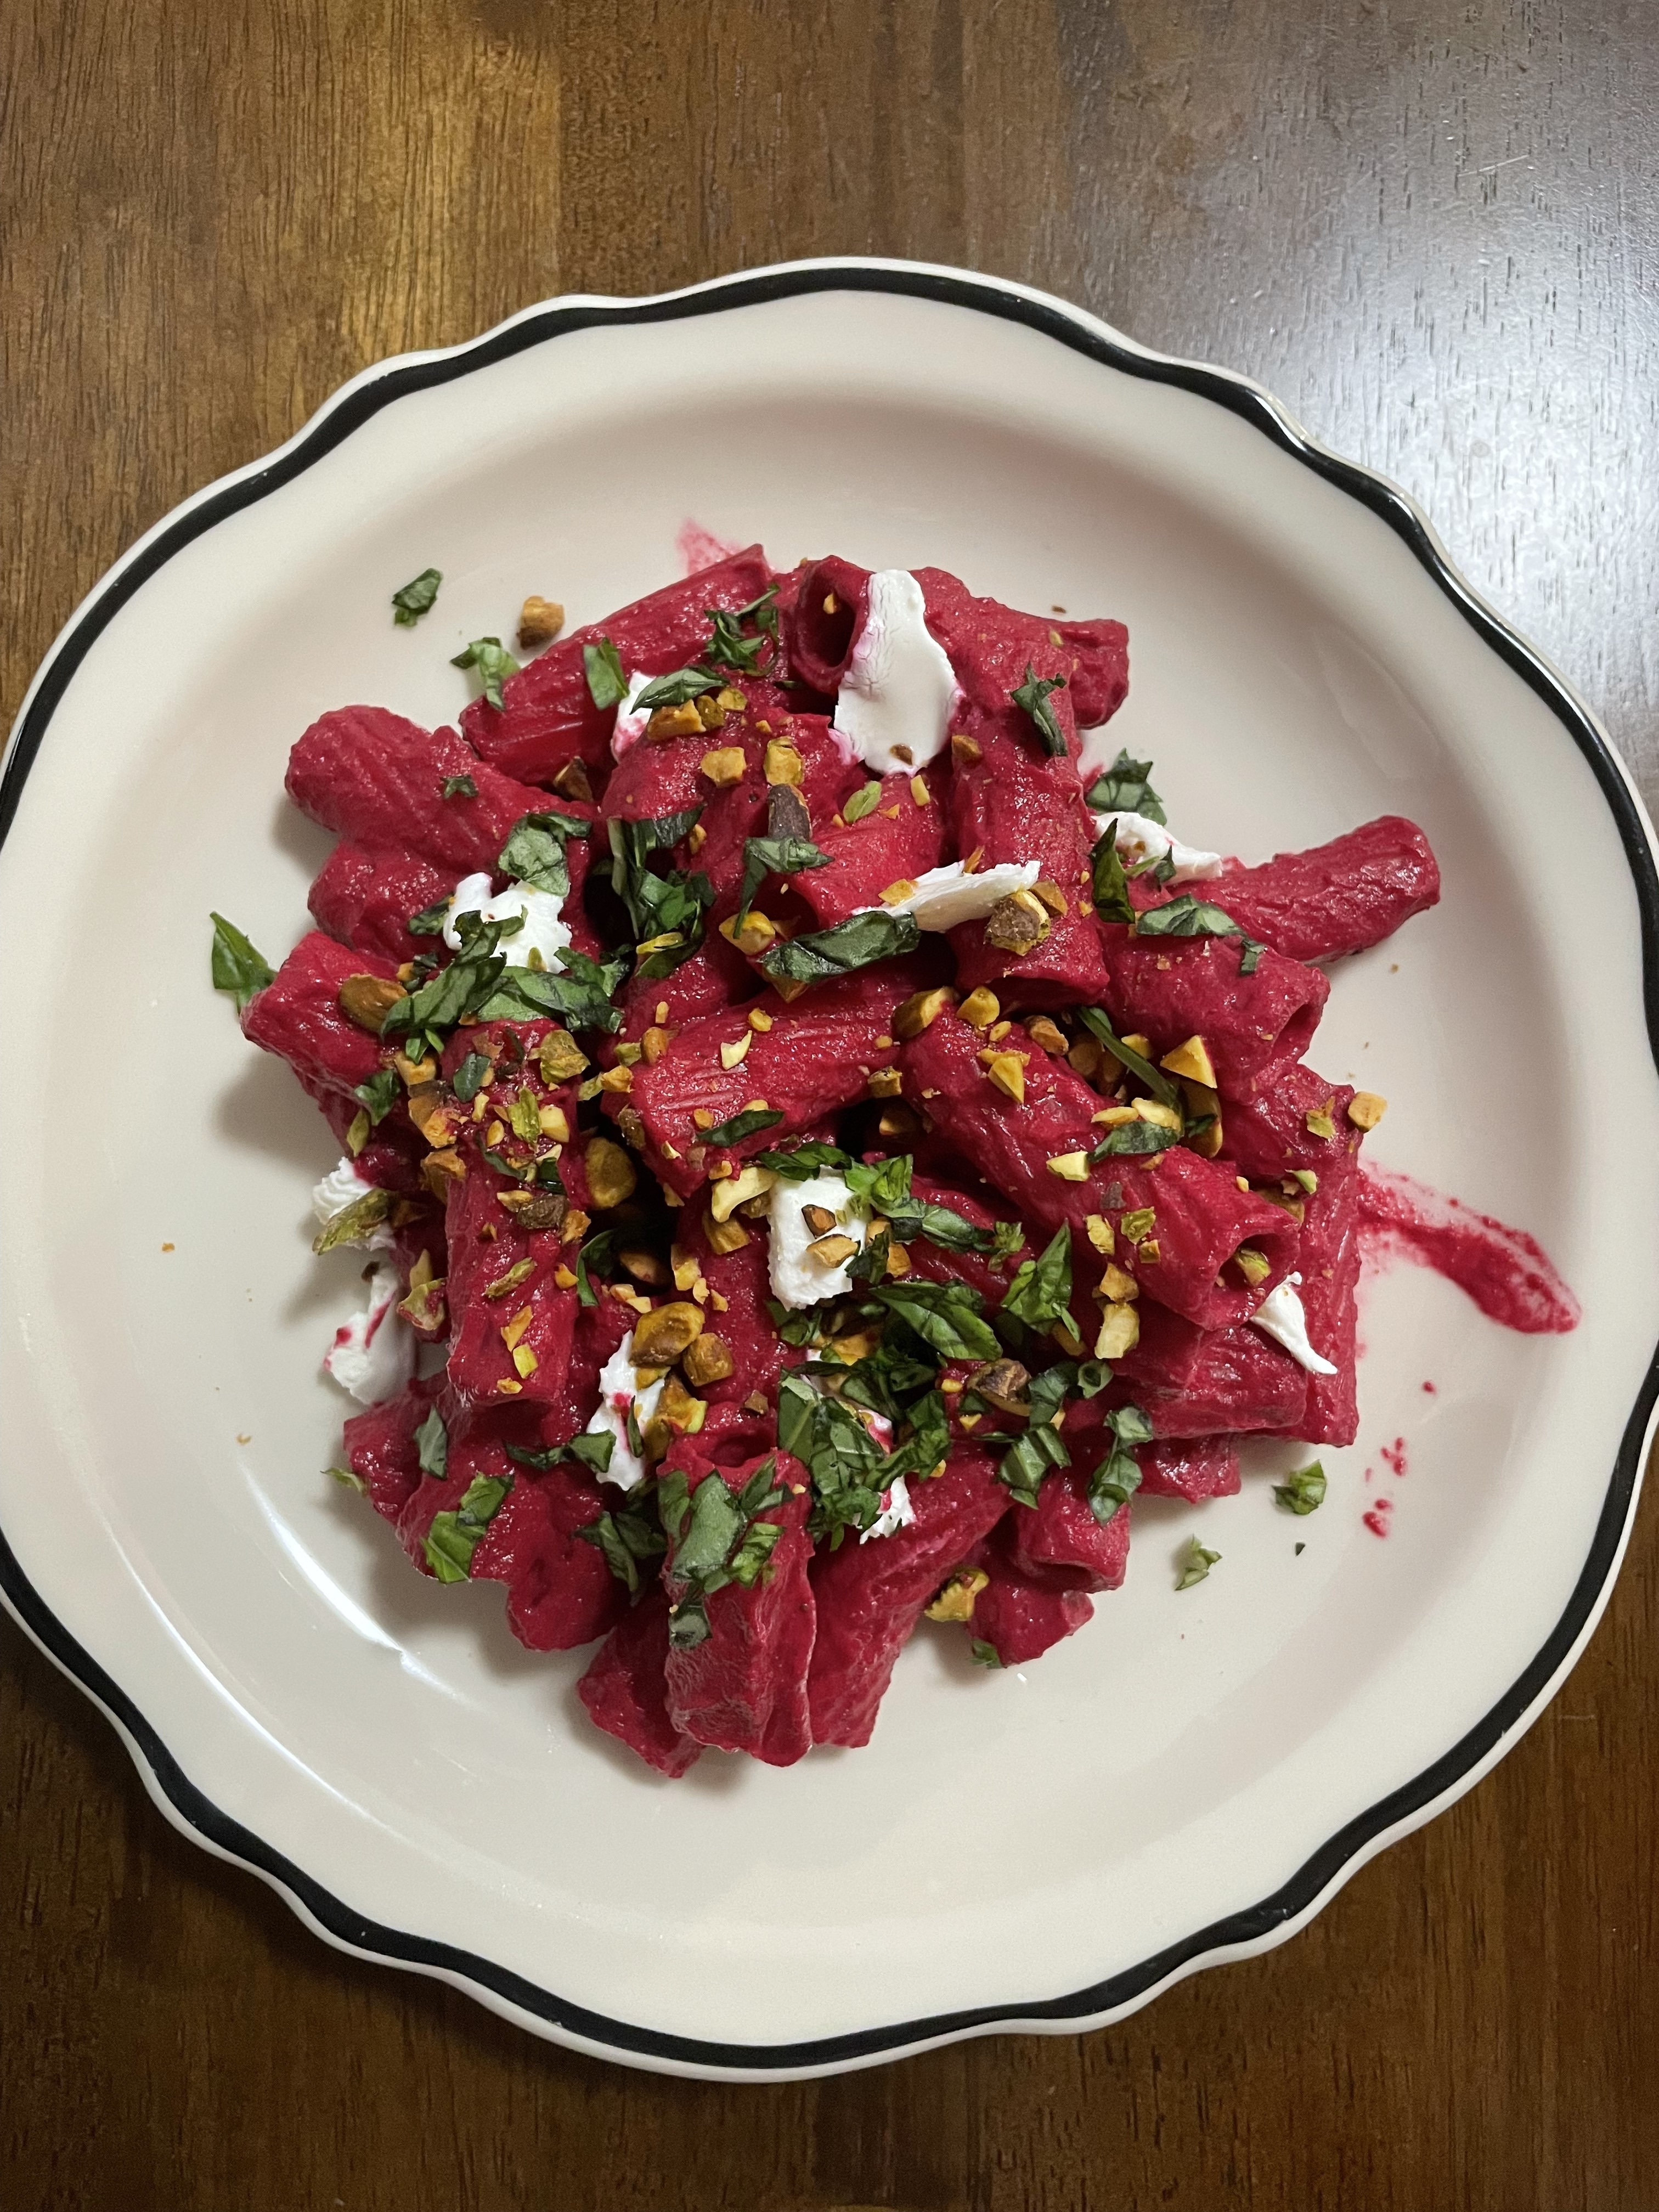 A plate of beet pasta topped with herbs, nuts, and goat cheese